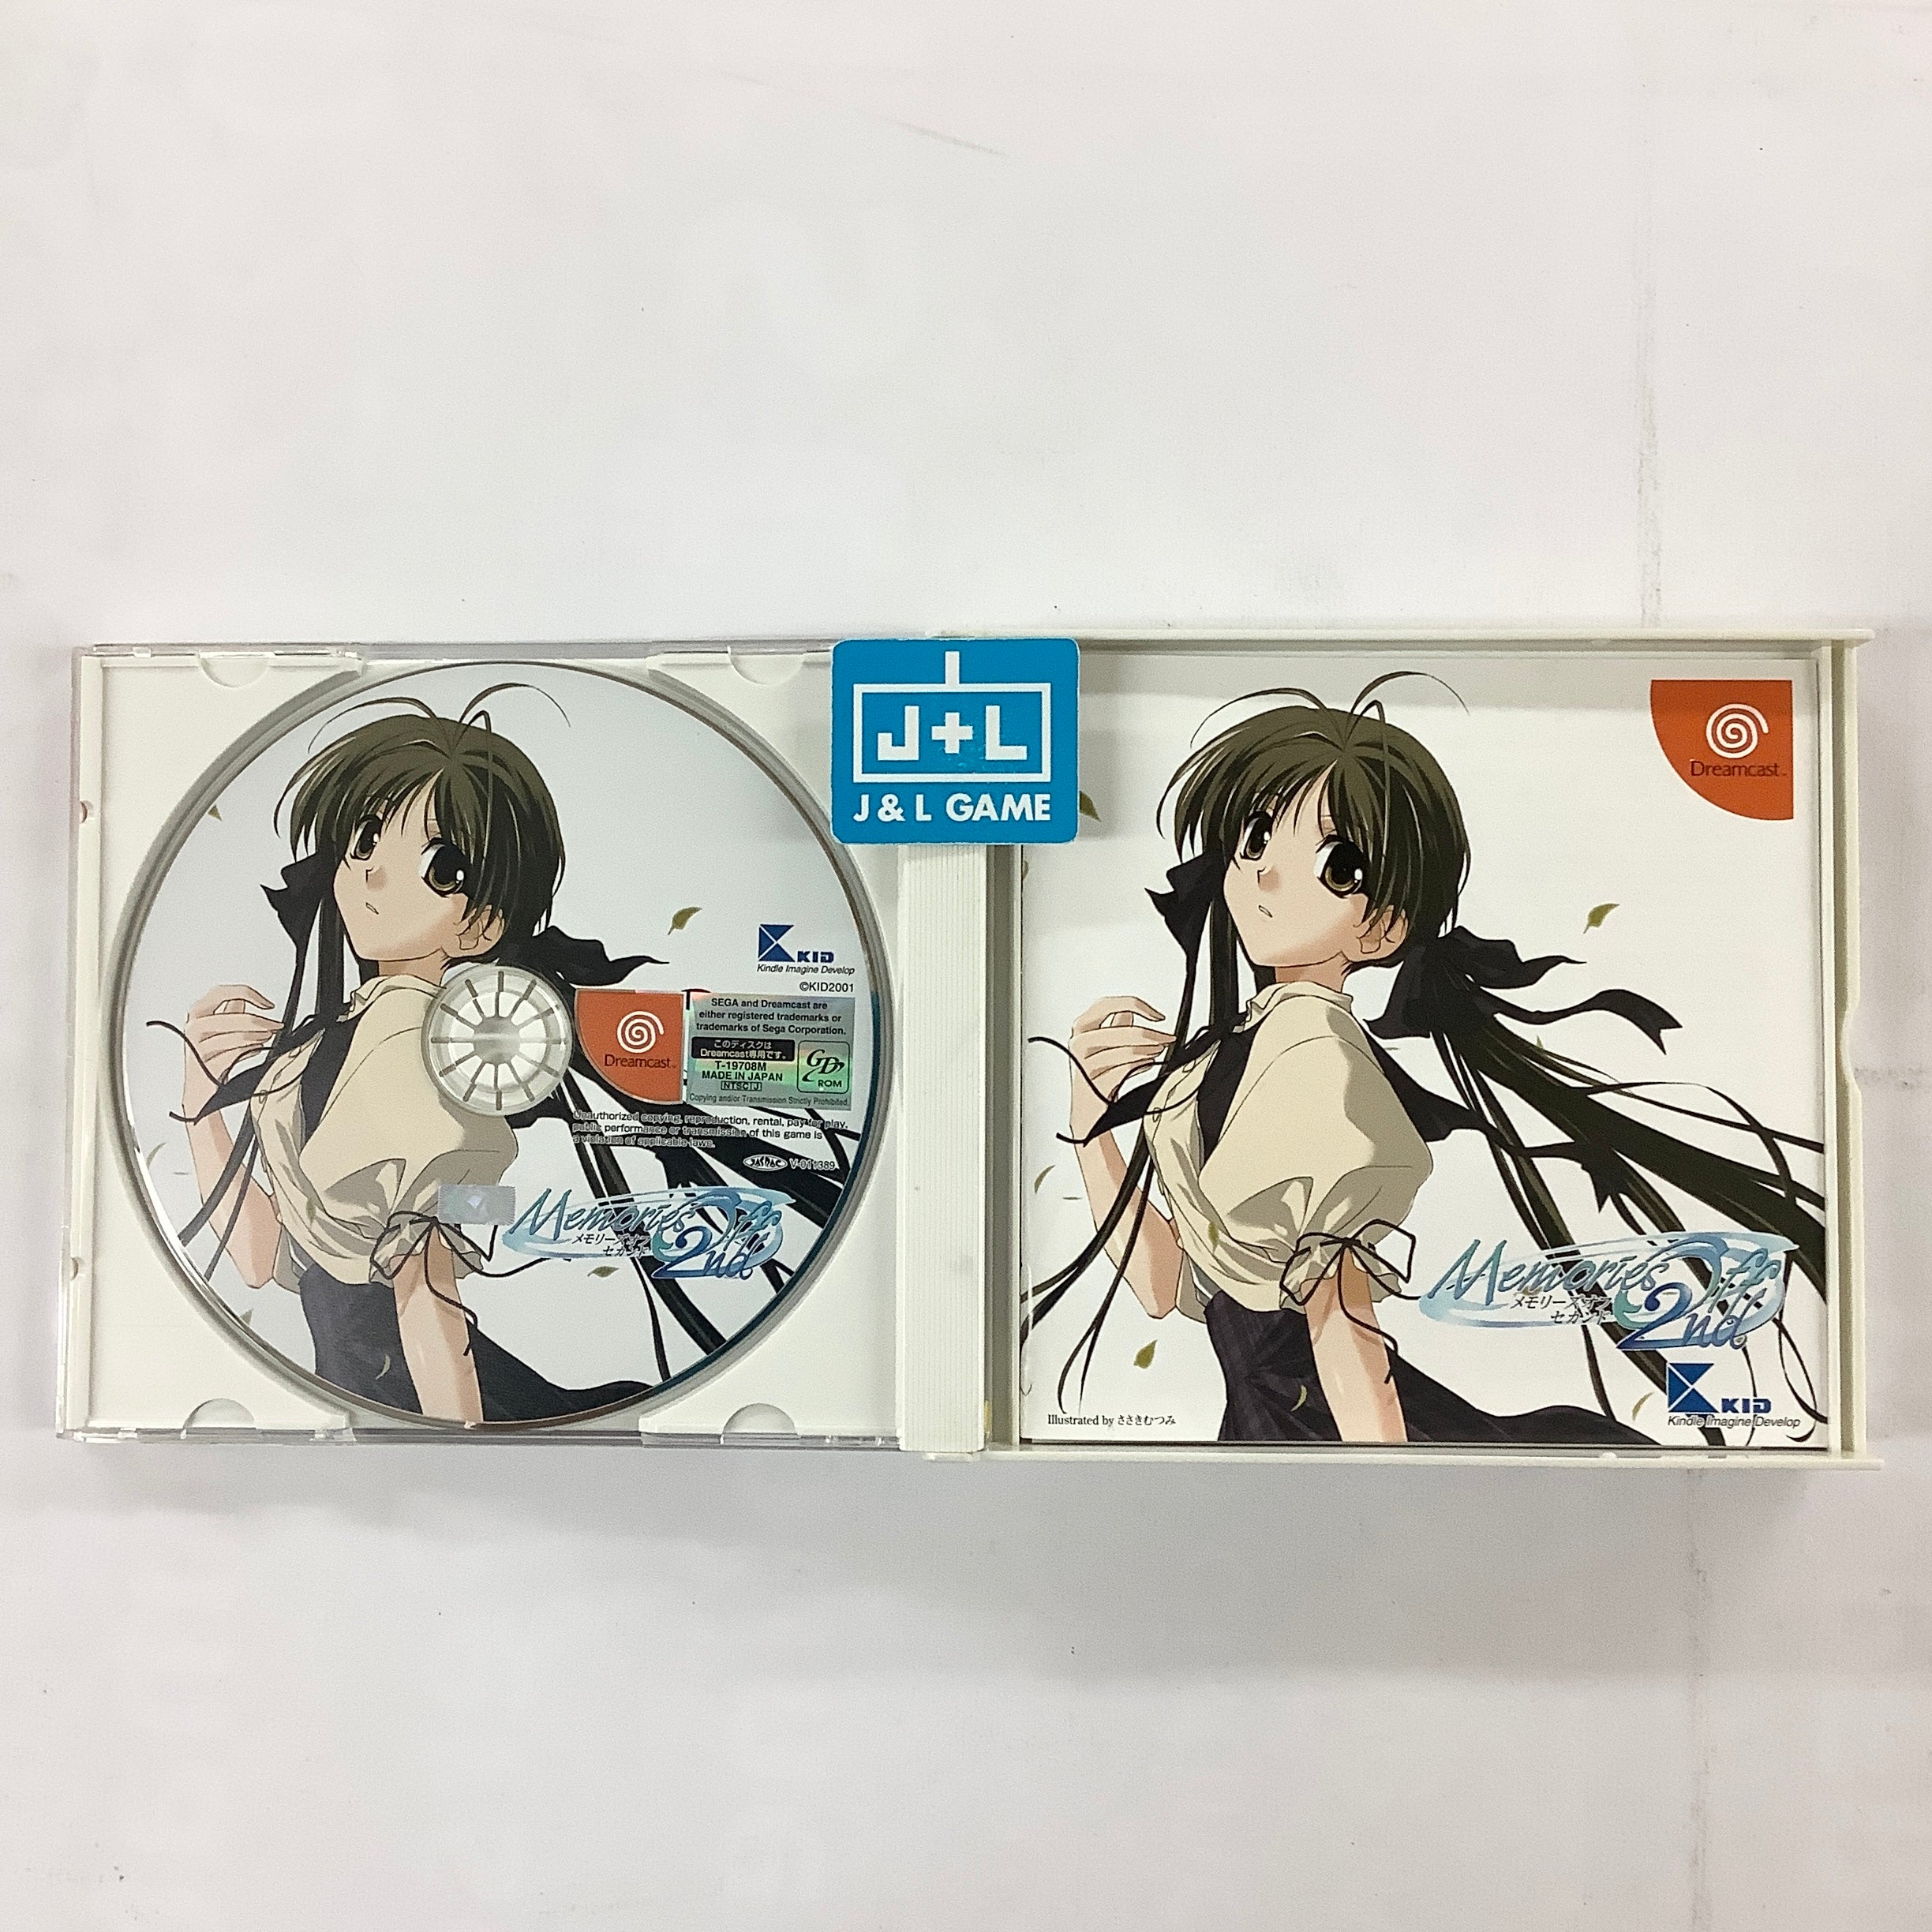 Memories Off 2nd (Limited Edition) - (DC) SEGA Dreamcast [Pre-Owned] (Japanese Import) Video Games Kid   